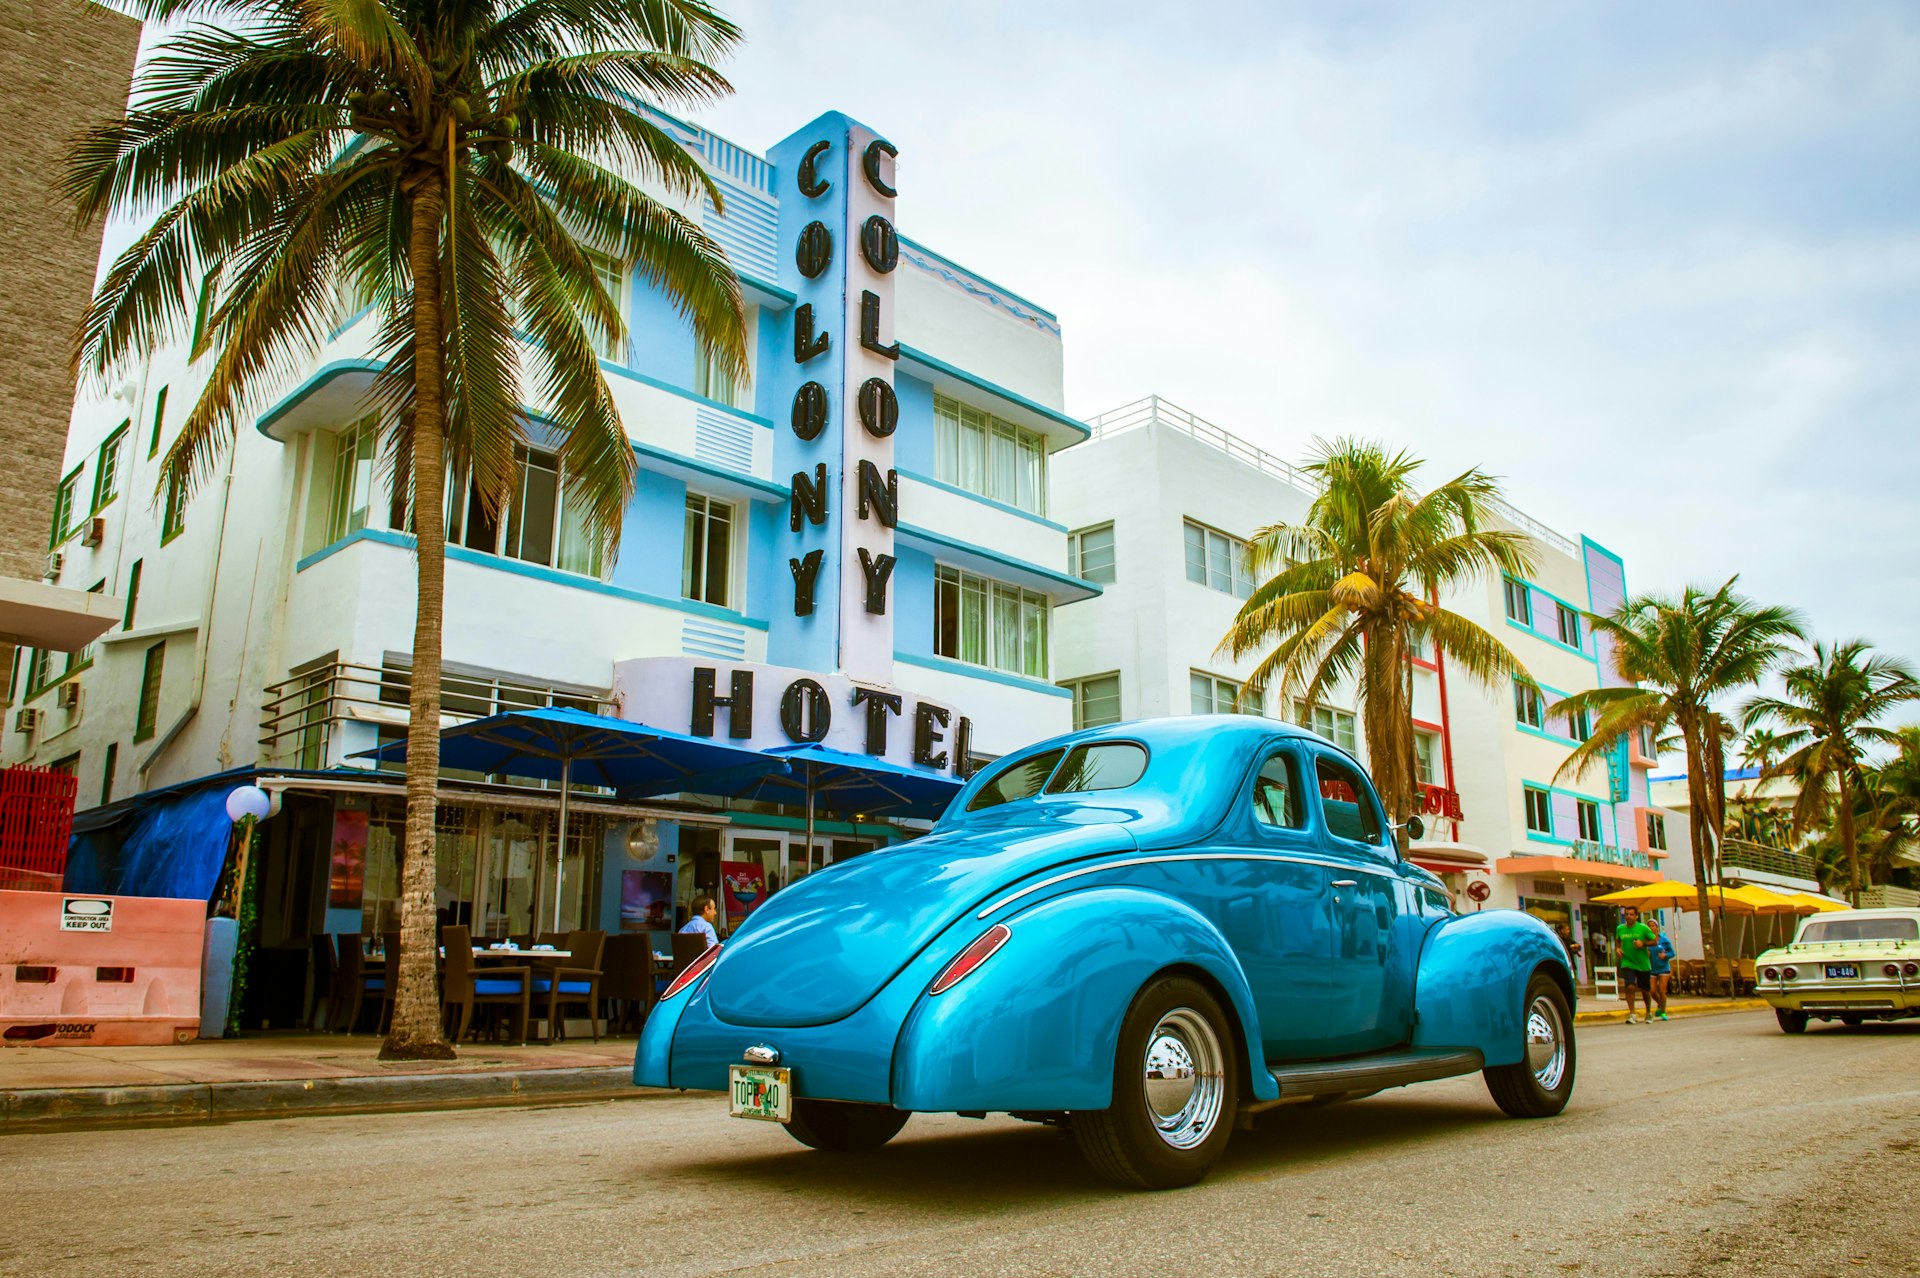 A vintage American automobile parked on Ocean Drive, Miami in front of the Colony Hotel during the annual Art Deco Weekend classic car show in South Beach.